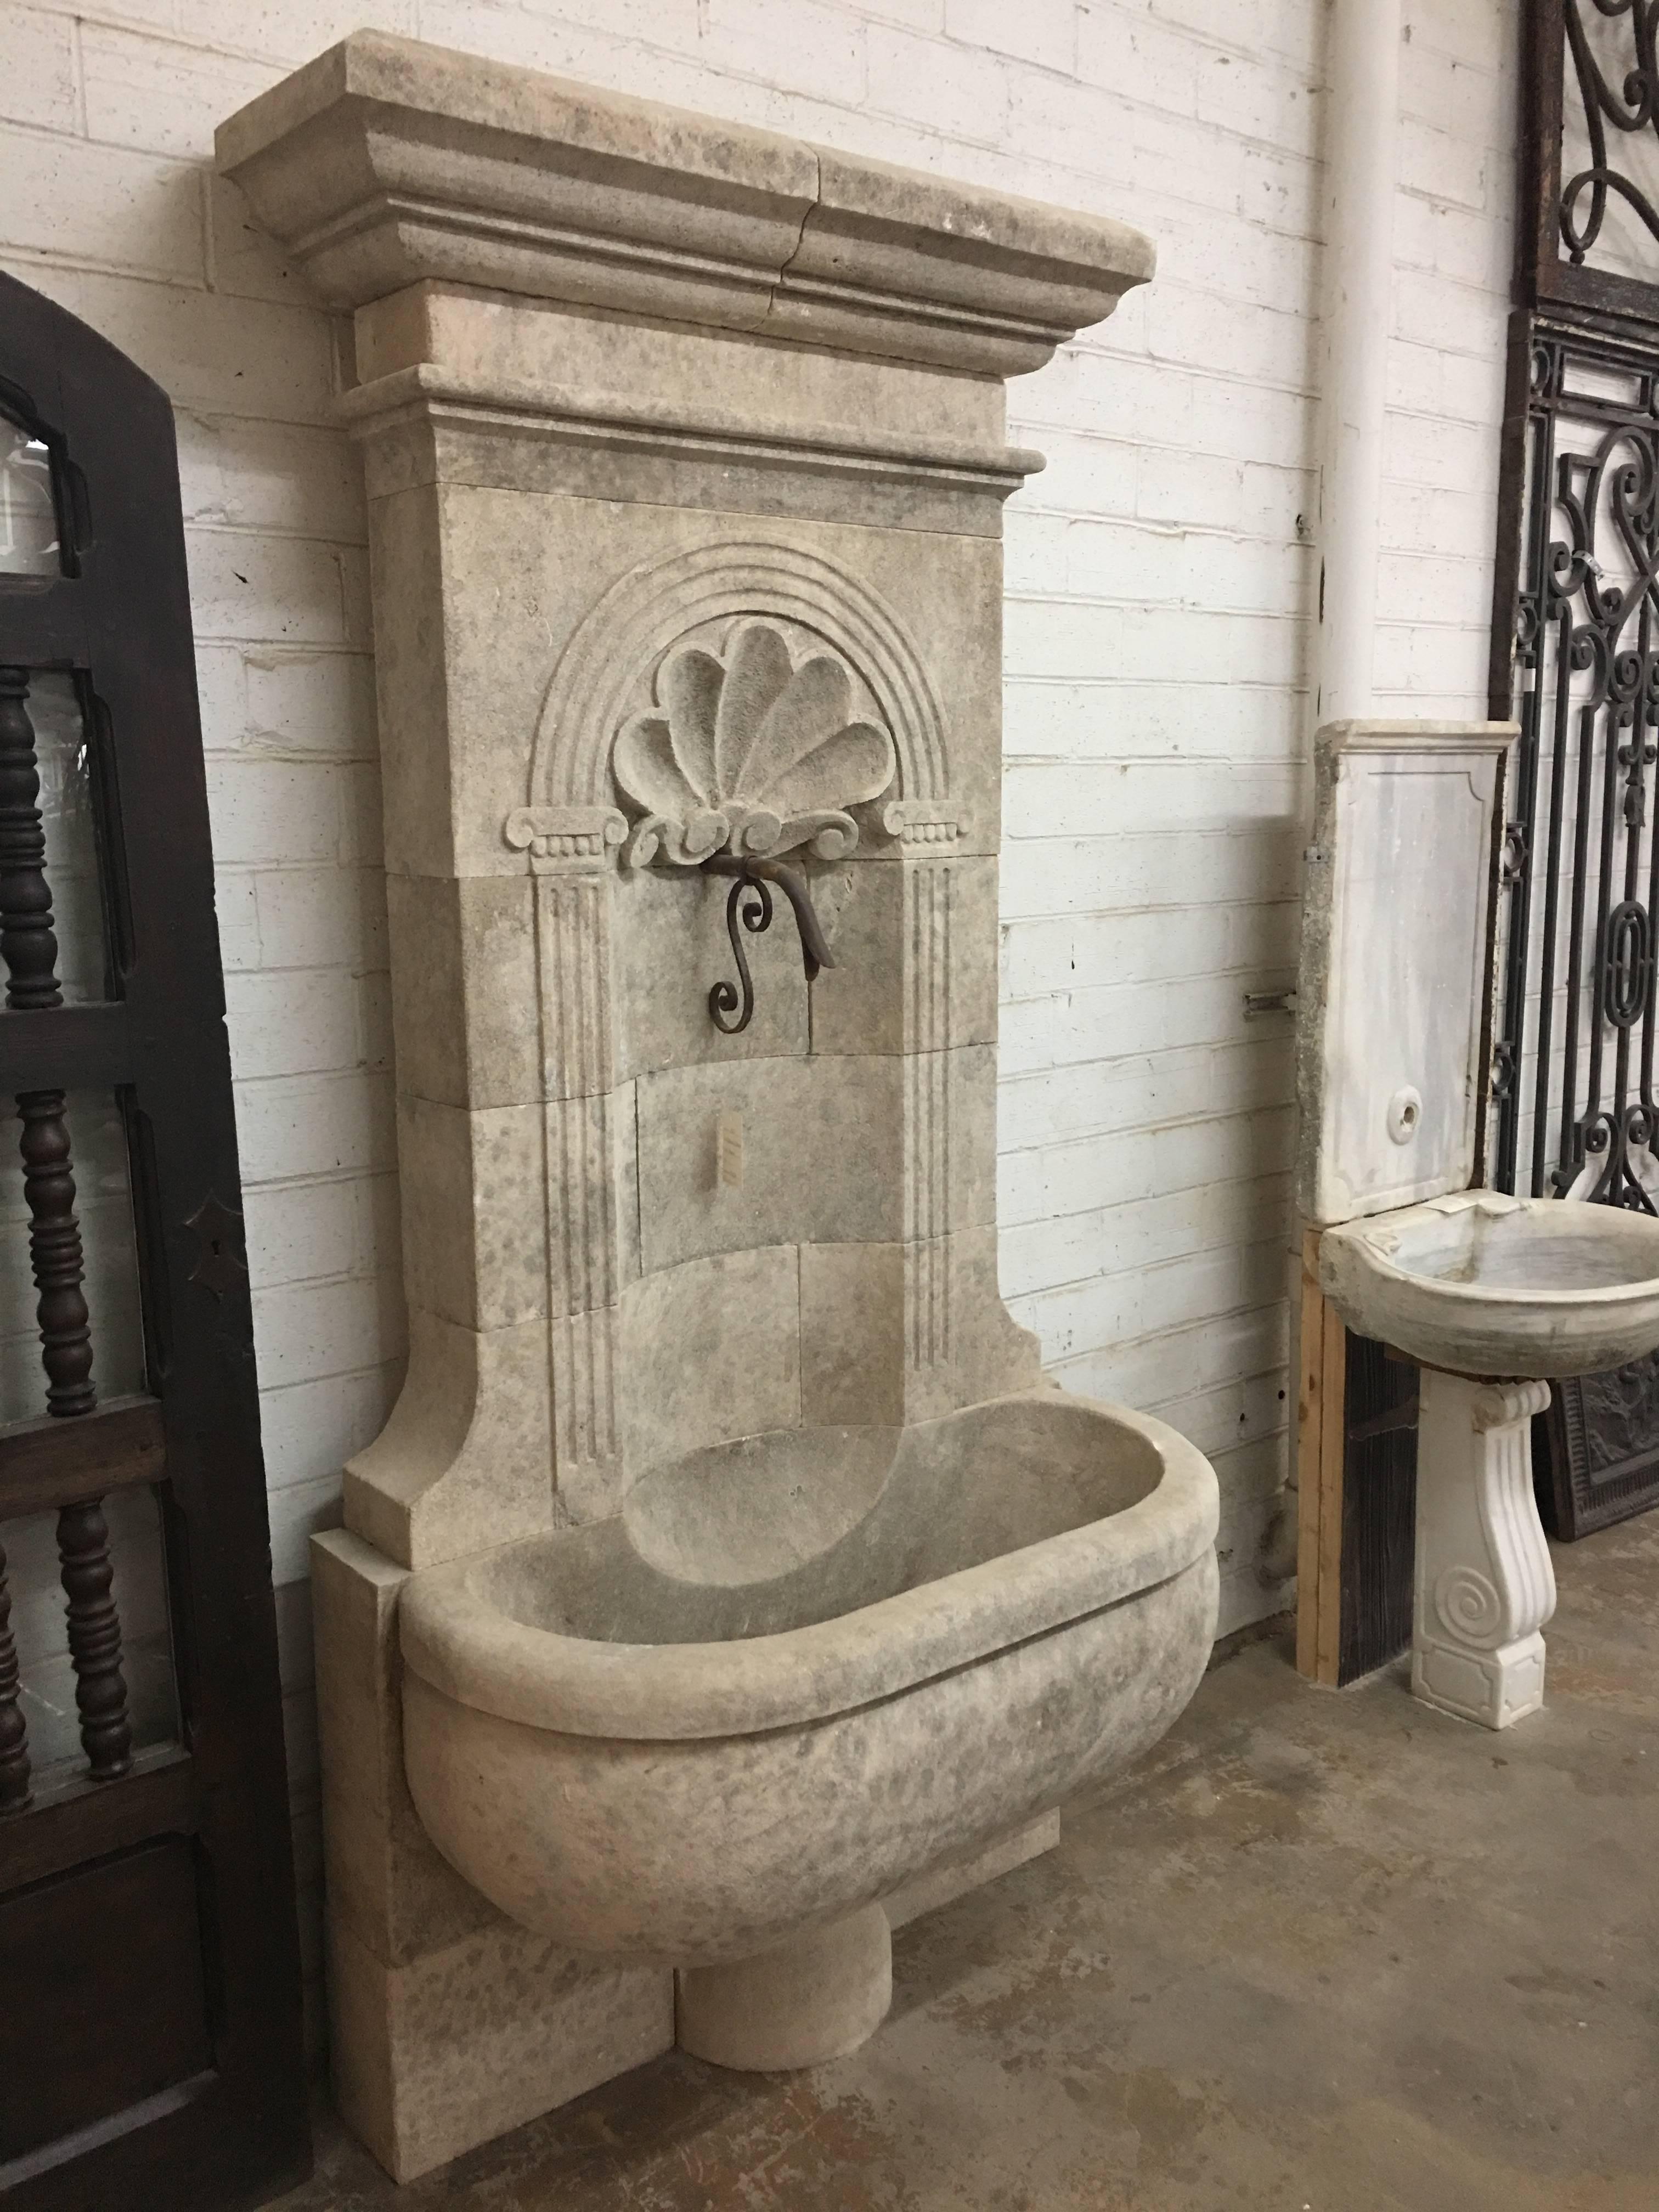 Here we offer a hand-carved limestone wall fountain of monumental proportions. The fluted columns and arch over the shell carving and water exit are all classic French design. The oversized bowl and overhanging crown are two more carved elements